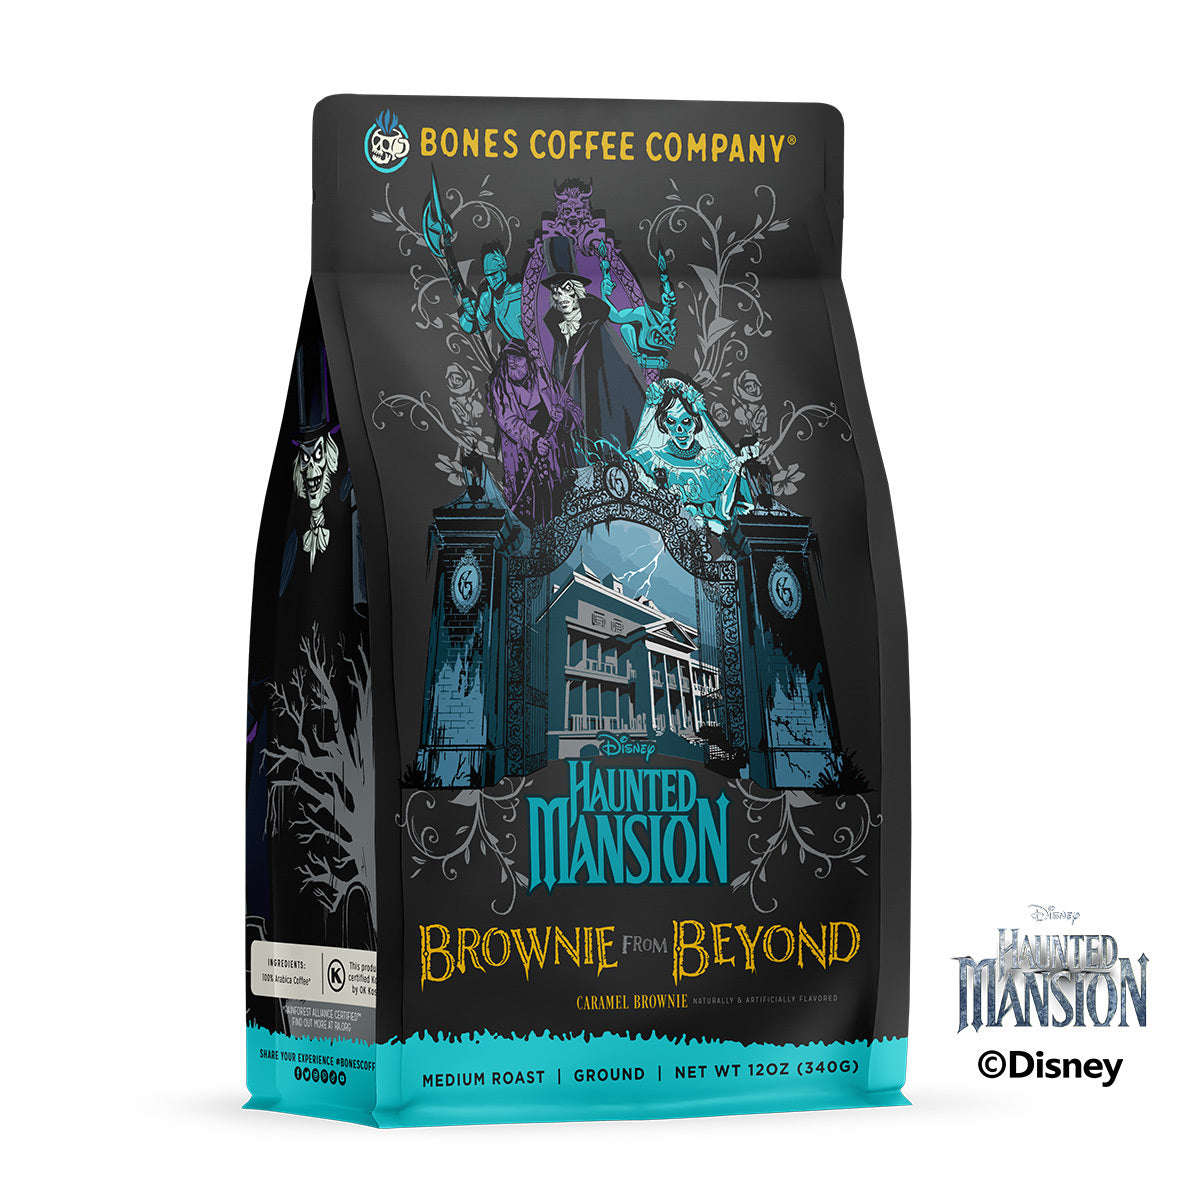 The front of a 12 ounce bag of Bones Coffee Company Brownie From Beyond coffee. Its flavor is caramel brownie, and it has art inspired by Disney Haunted Mansion on its front, including the mansion and its inhabitants.